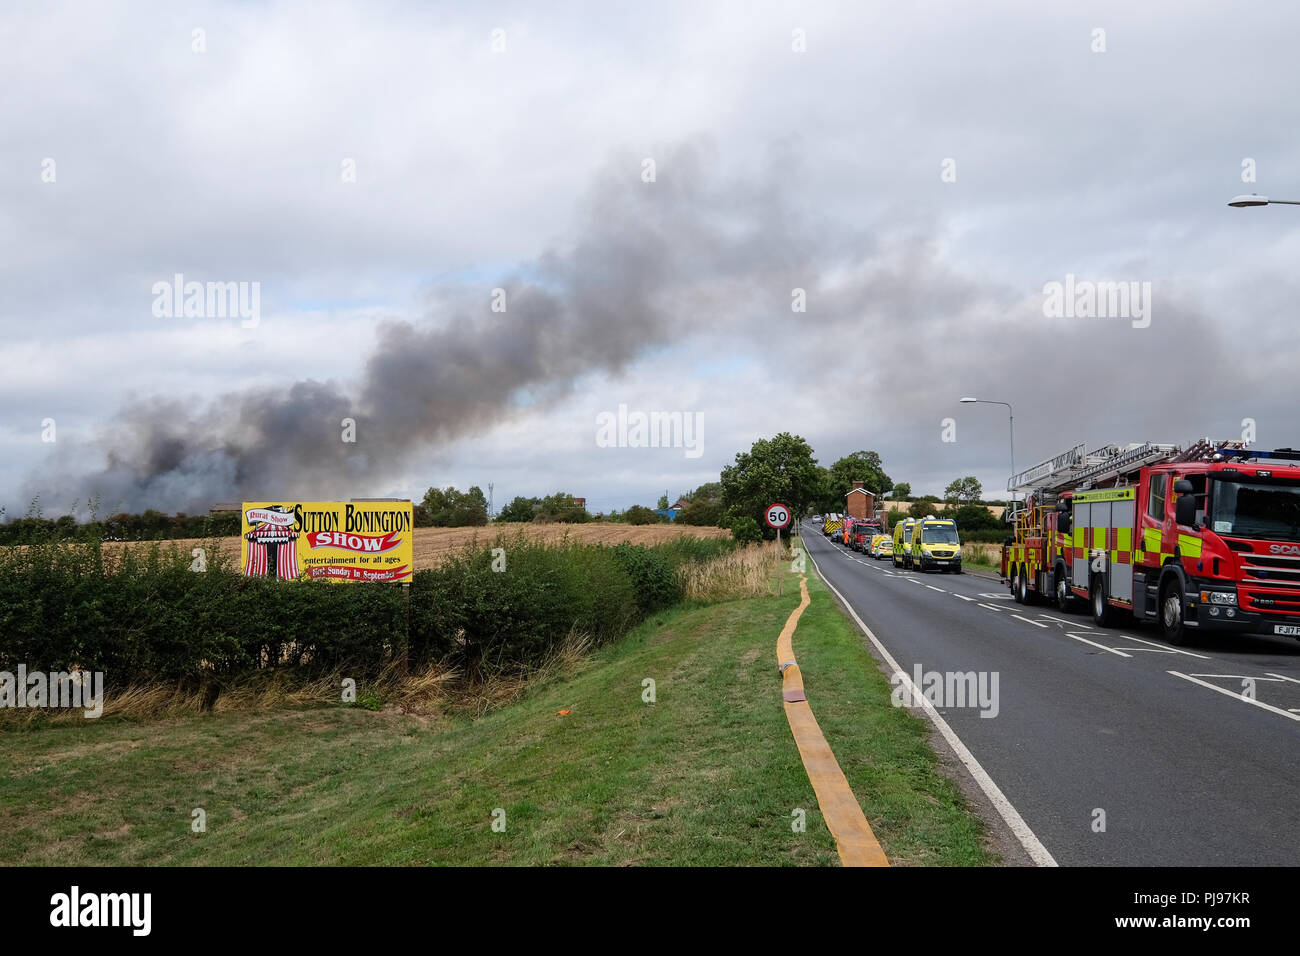 emergency services at the scene of a large fire Stock Photo